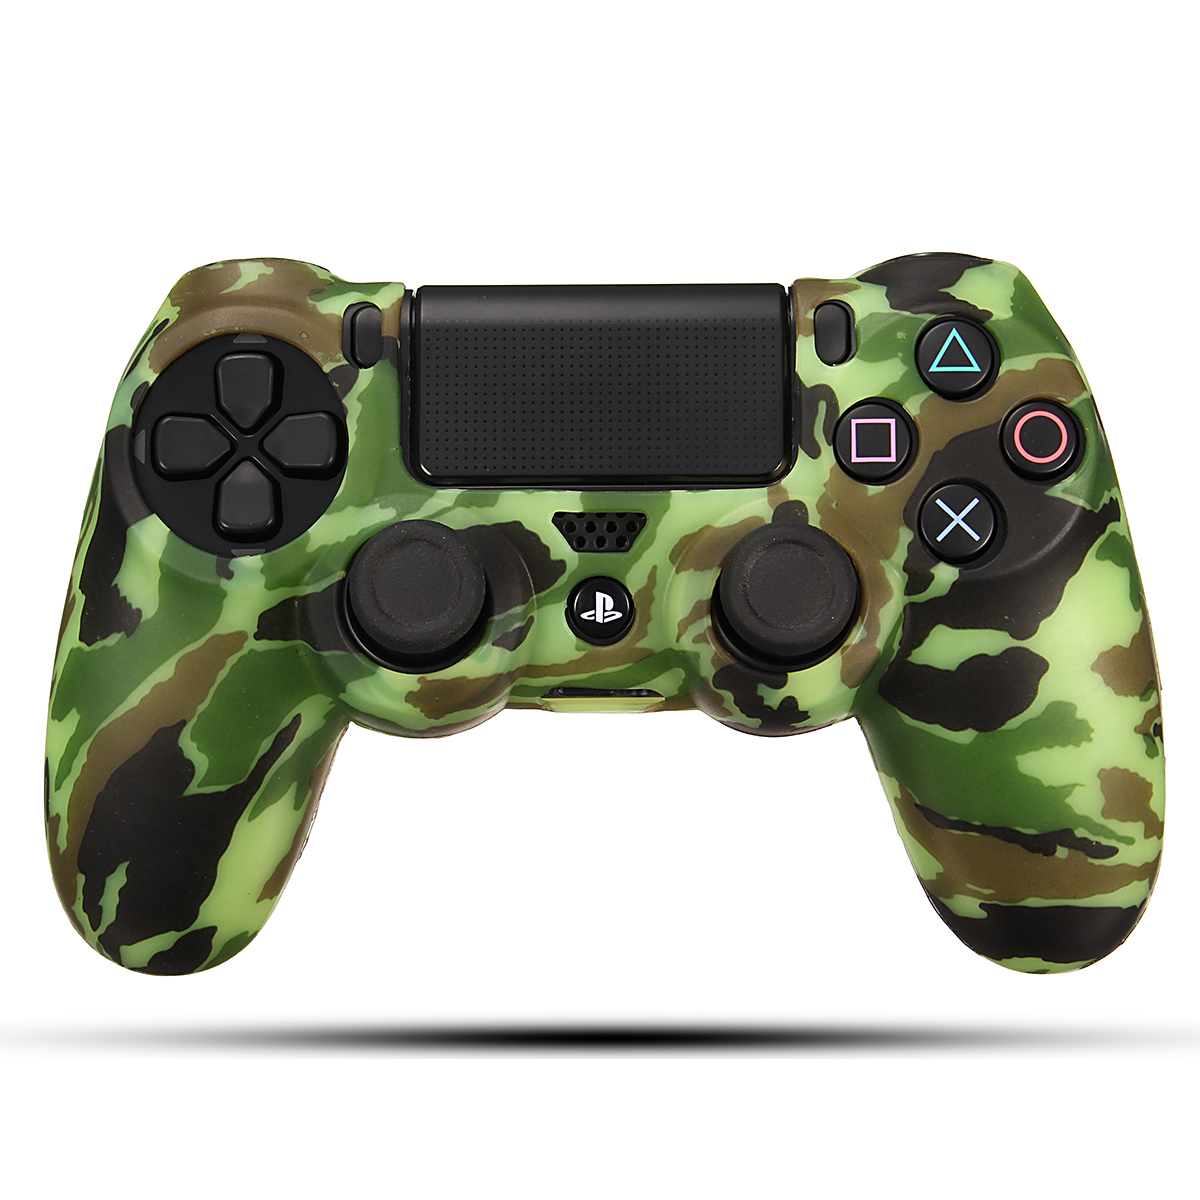 Durable Decal Camouflage Grip Cover Case Silicone Rubber Soft Skin Protector for Playstation 4 for Dualshock 4 Gamepad 21